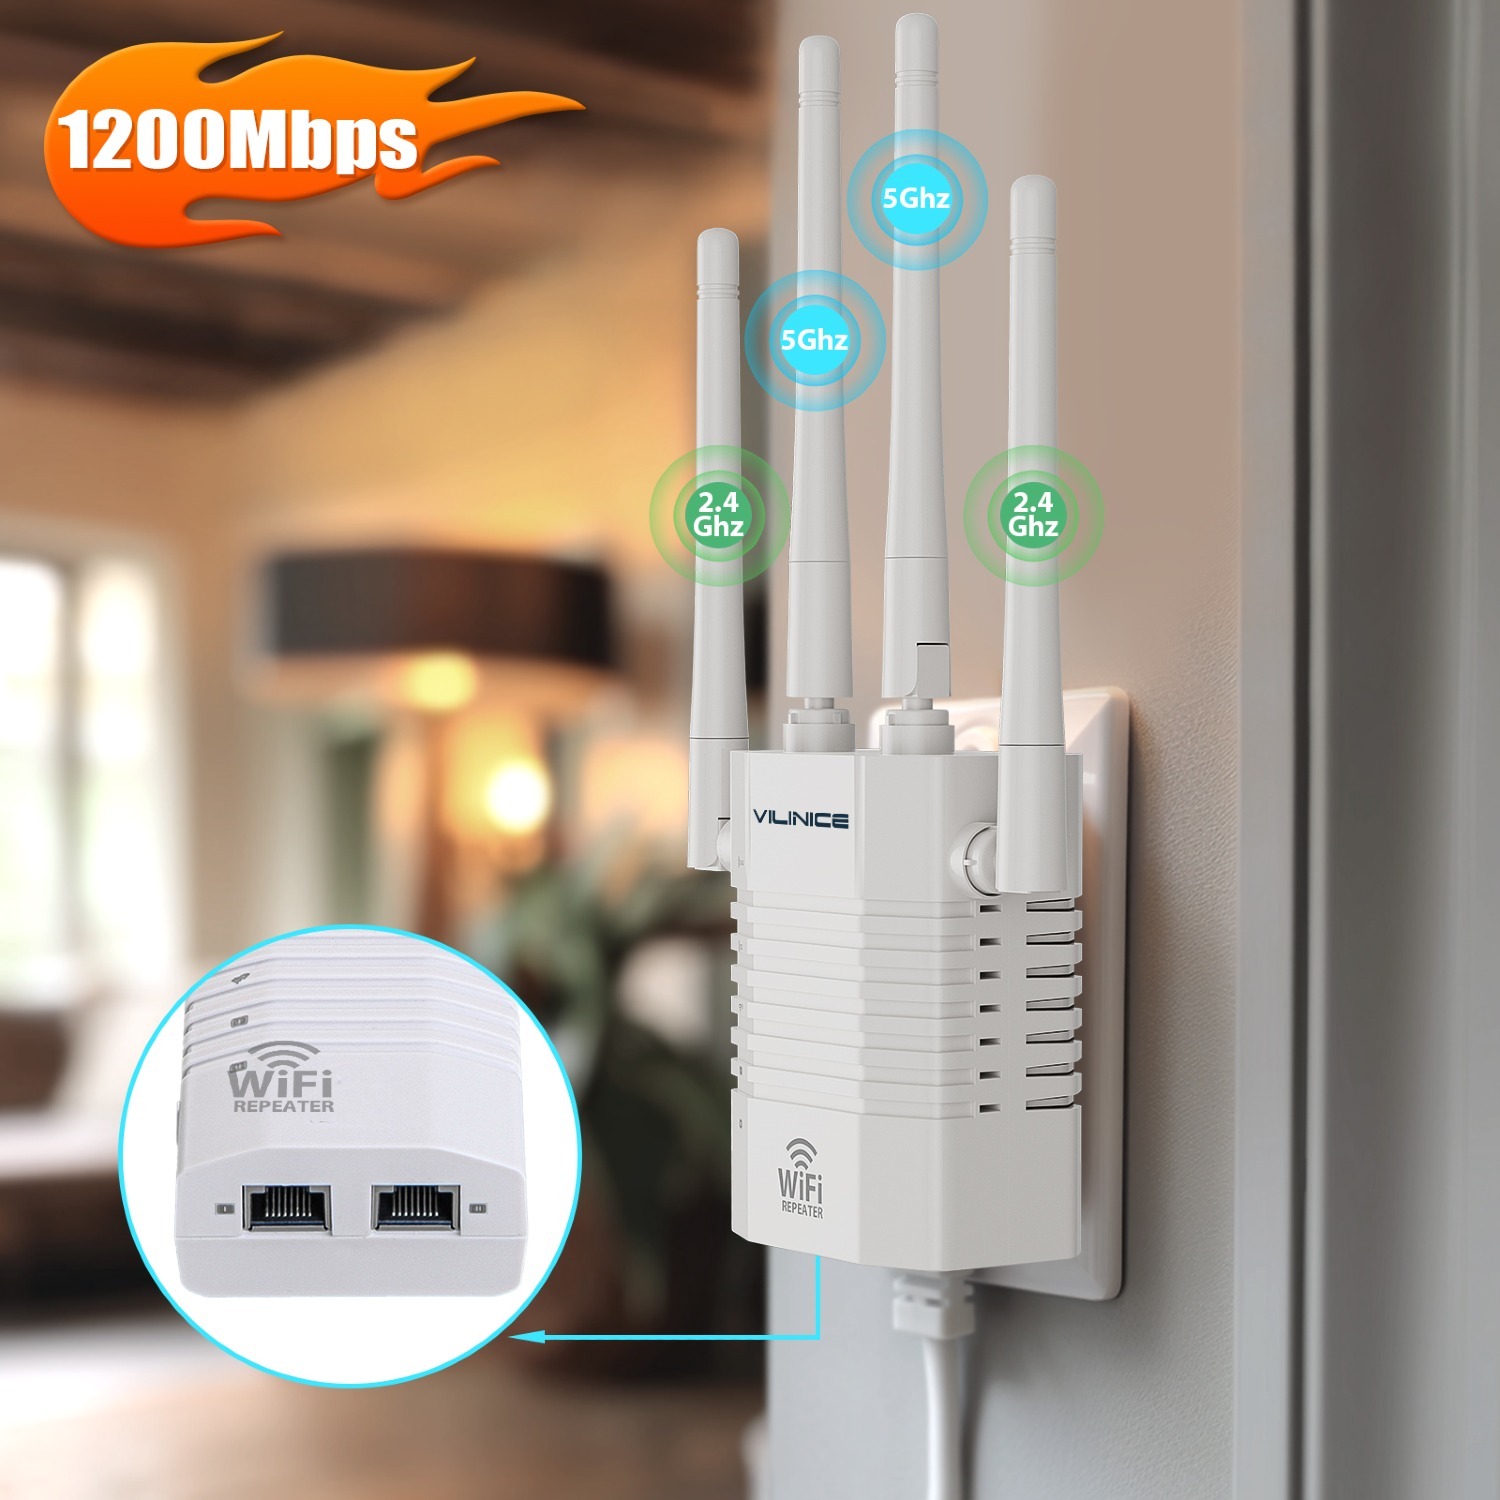 VILINICE Dual Band Wifi Extender 1200Mbps (8800sq.ft Coverage, 35+ Devices) $20 + Free Shipping w/ Walmart+ or $35+ orders